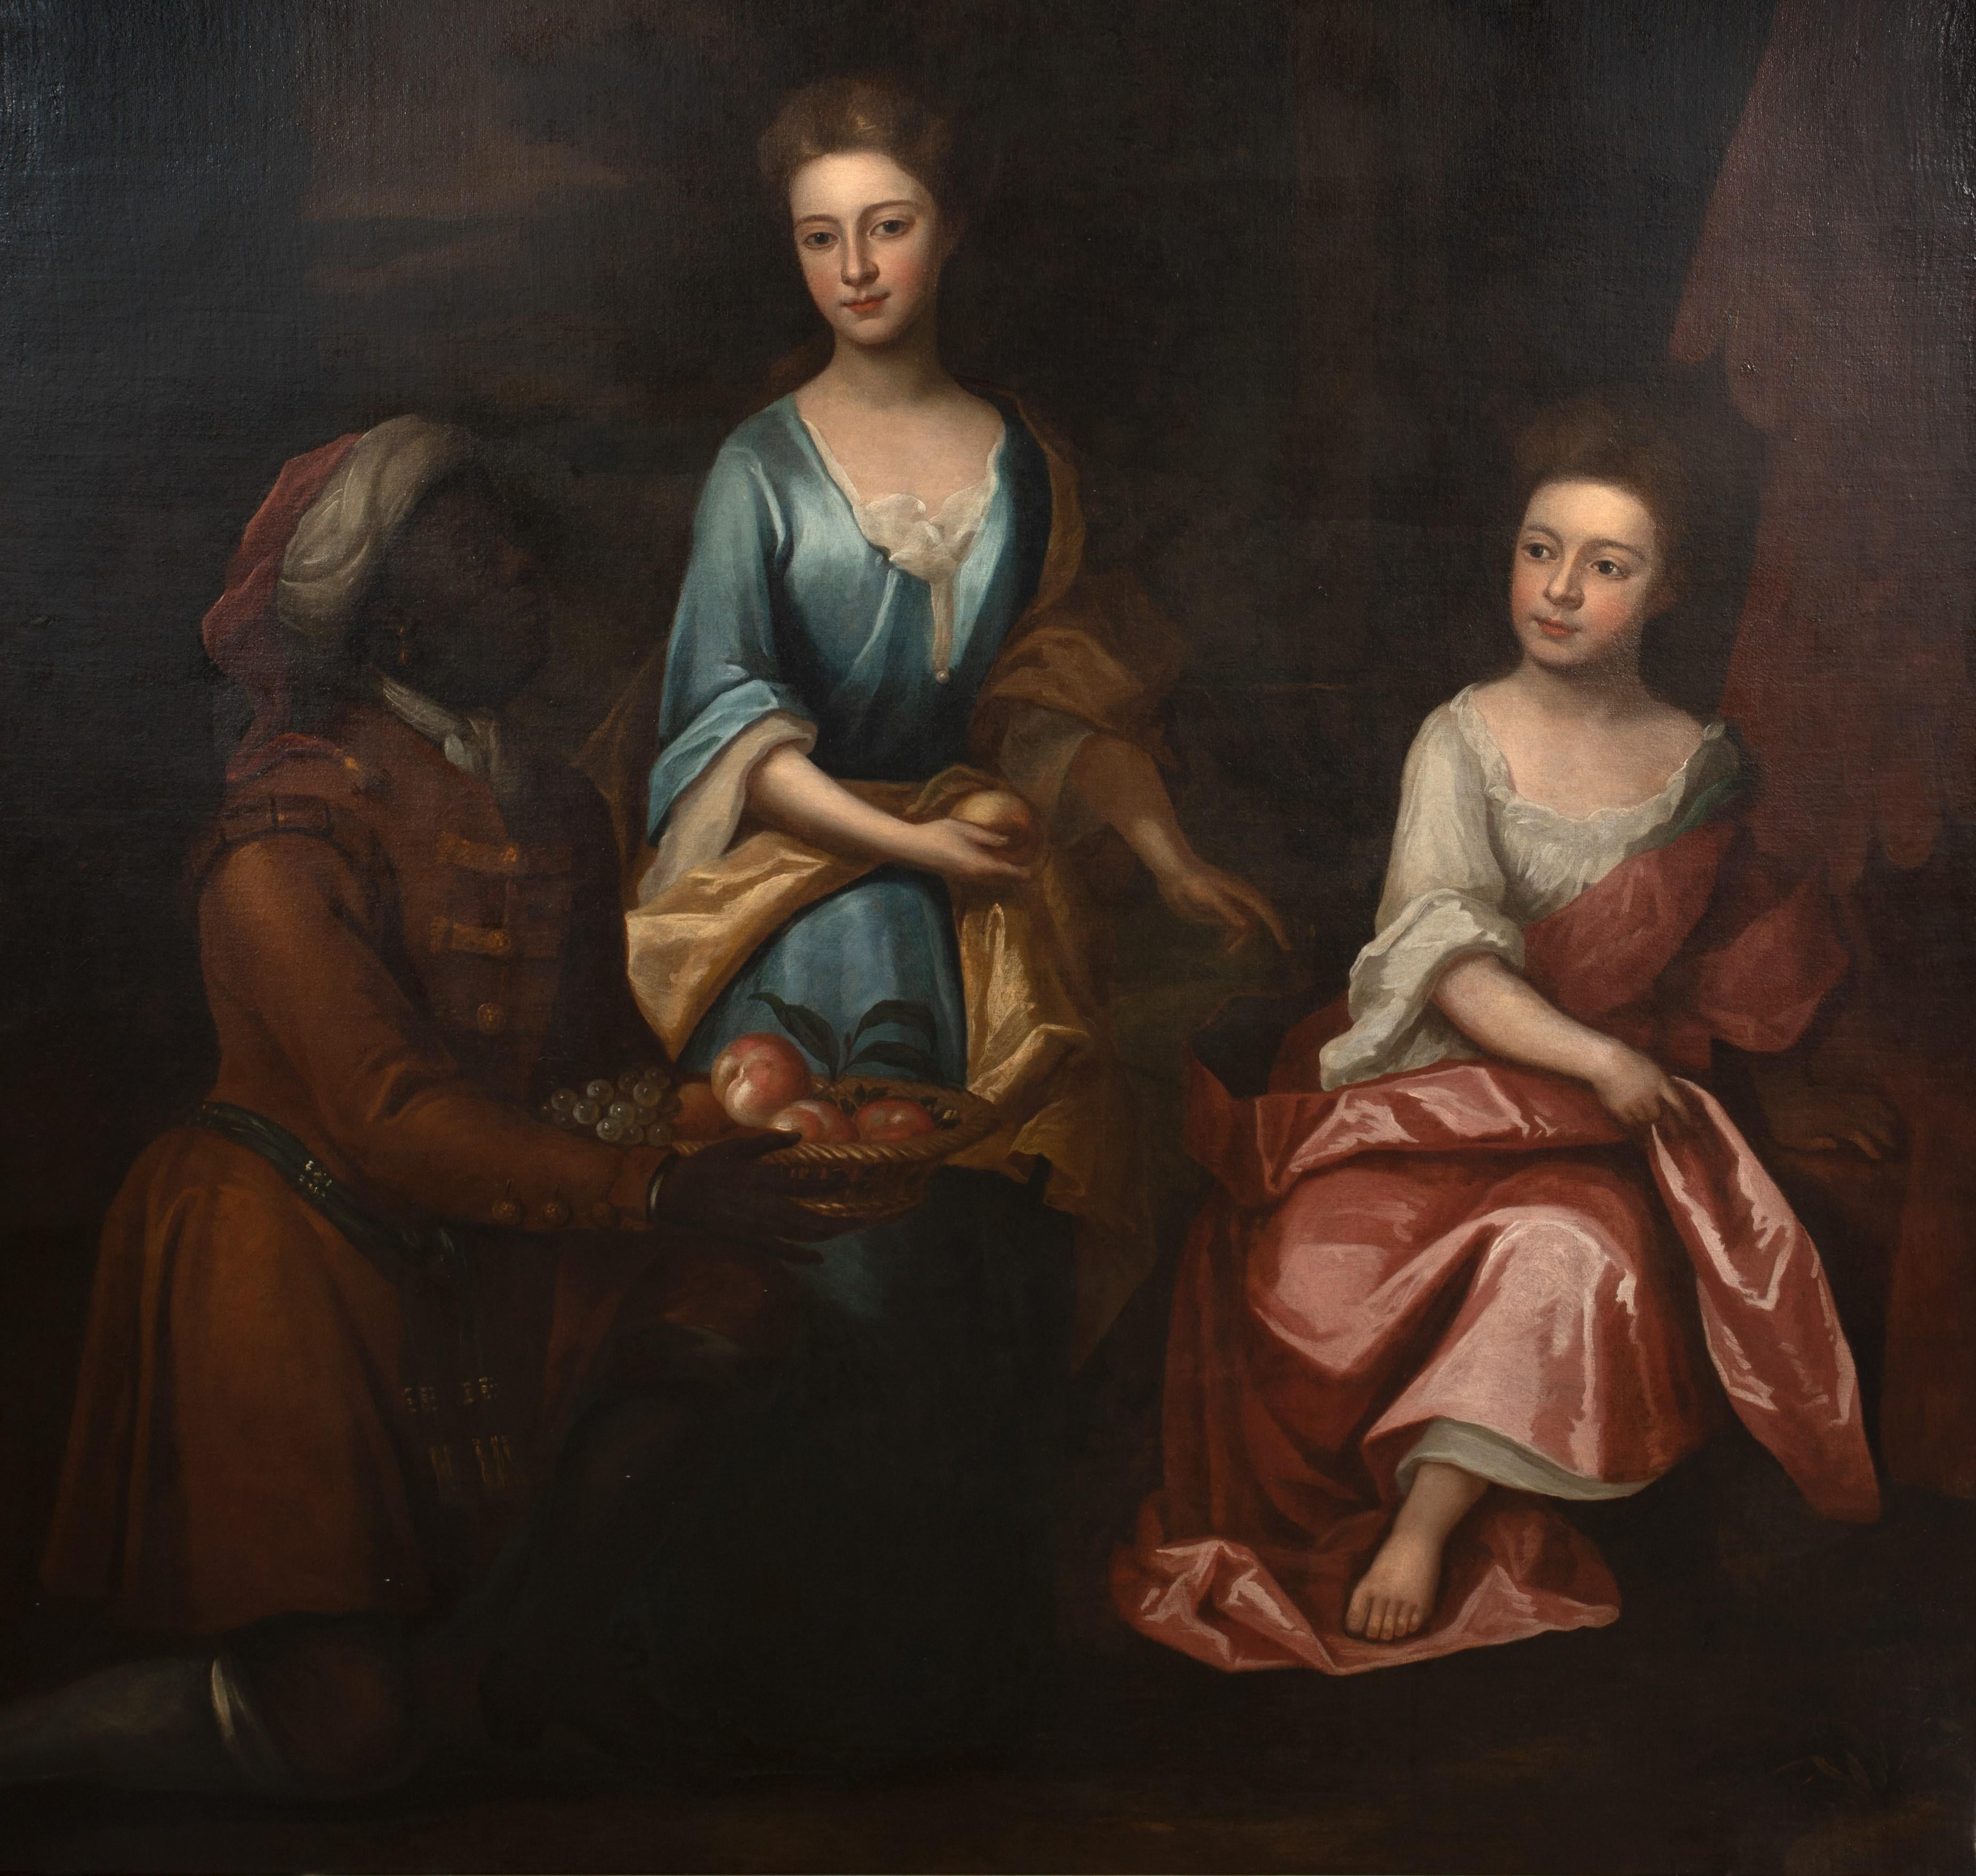 Portrait Of Two Girls & A Servant, 17th Century

circle of Sir Godfrey KNELLER (1646-1723)

Huge 17th Century English Old Master portrait of two young girls and a servant, oil on canvas. Huge scale full length study of the two young women with a